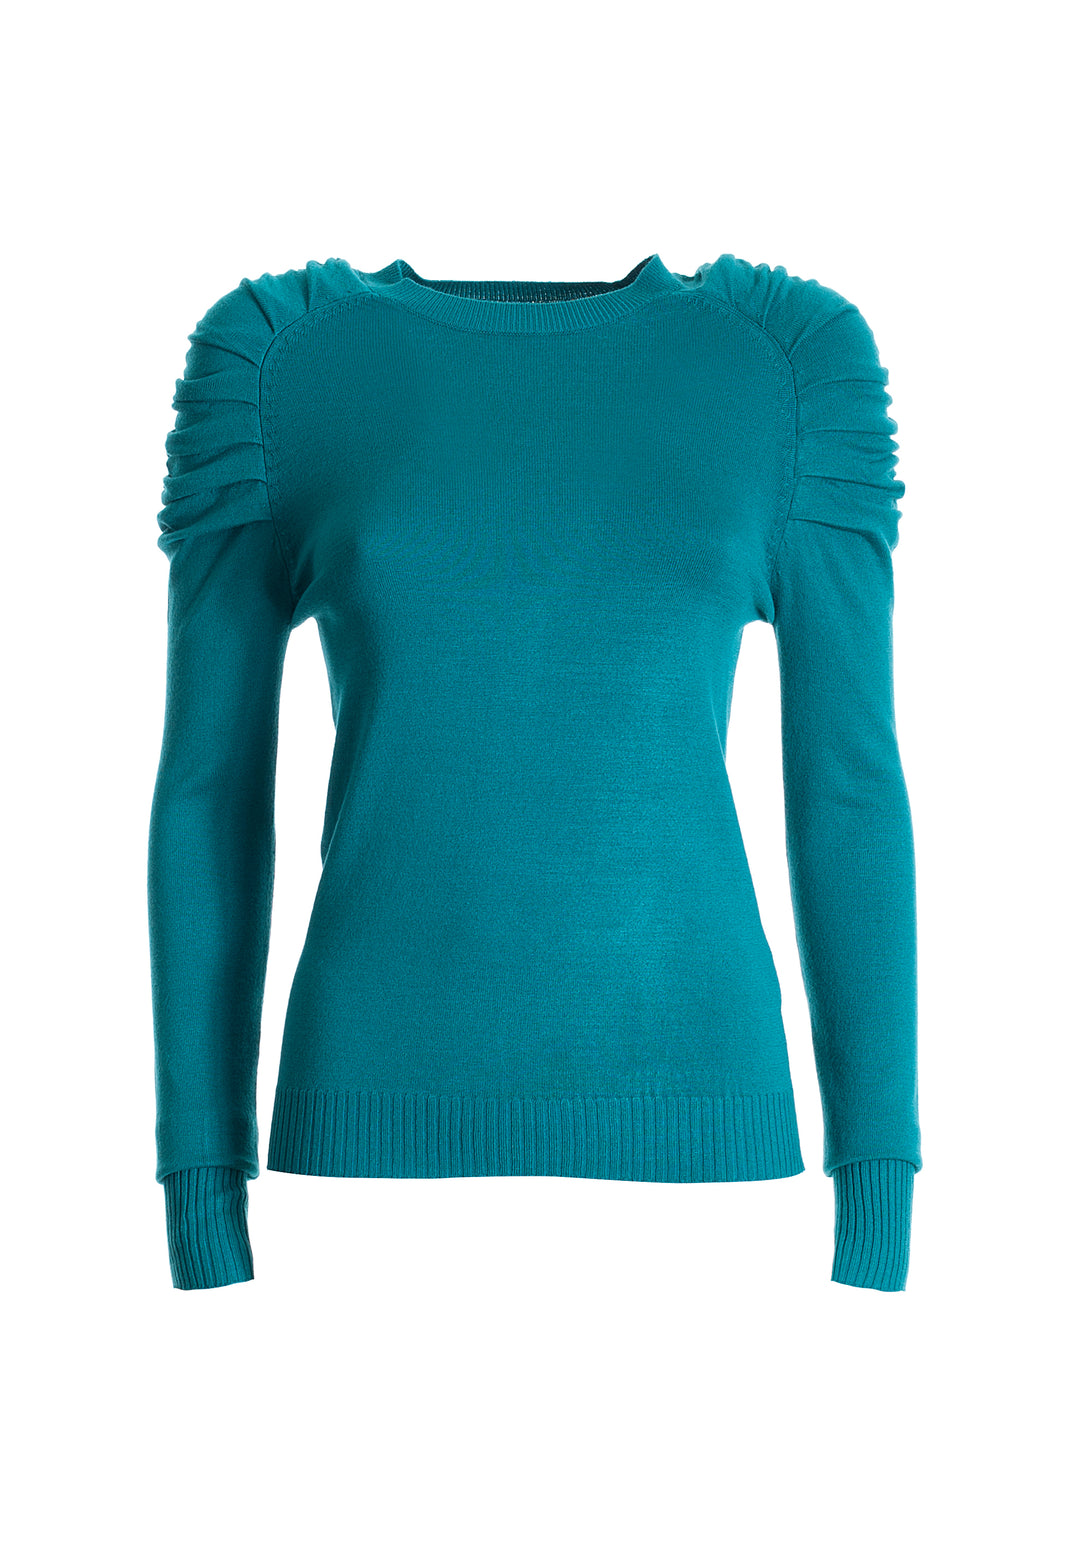 Knitwear tight fit with long sleeves and curls at the shoulders